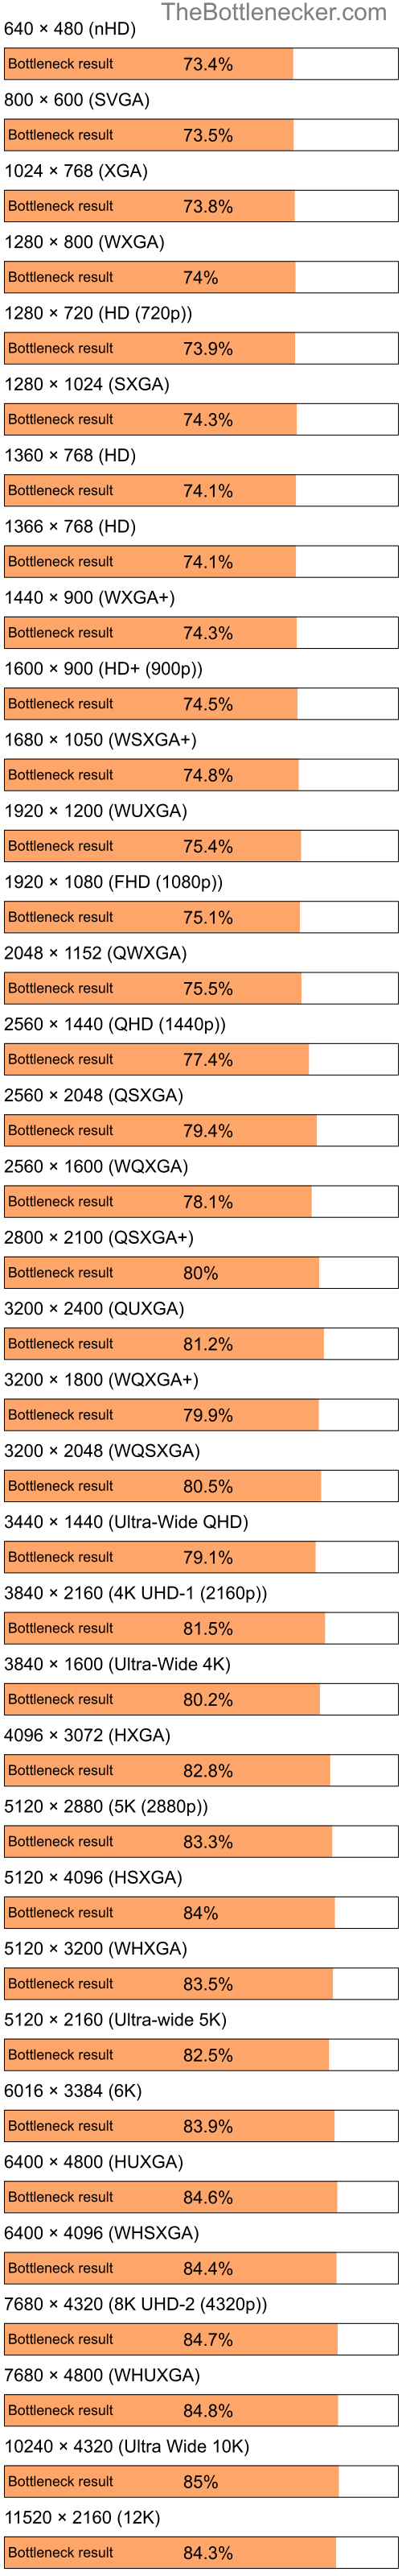 Bottleneck results by resolution for Intel Pentium 4 and NVIDIA GeForce 6200 A-LE in General Tasks